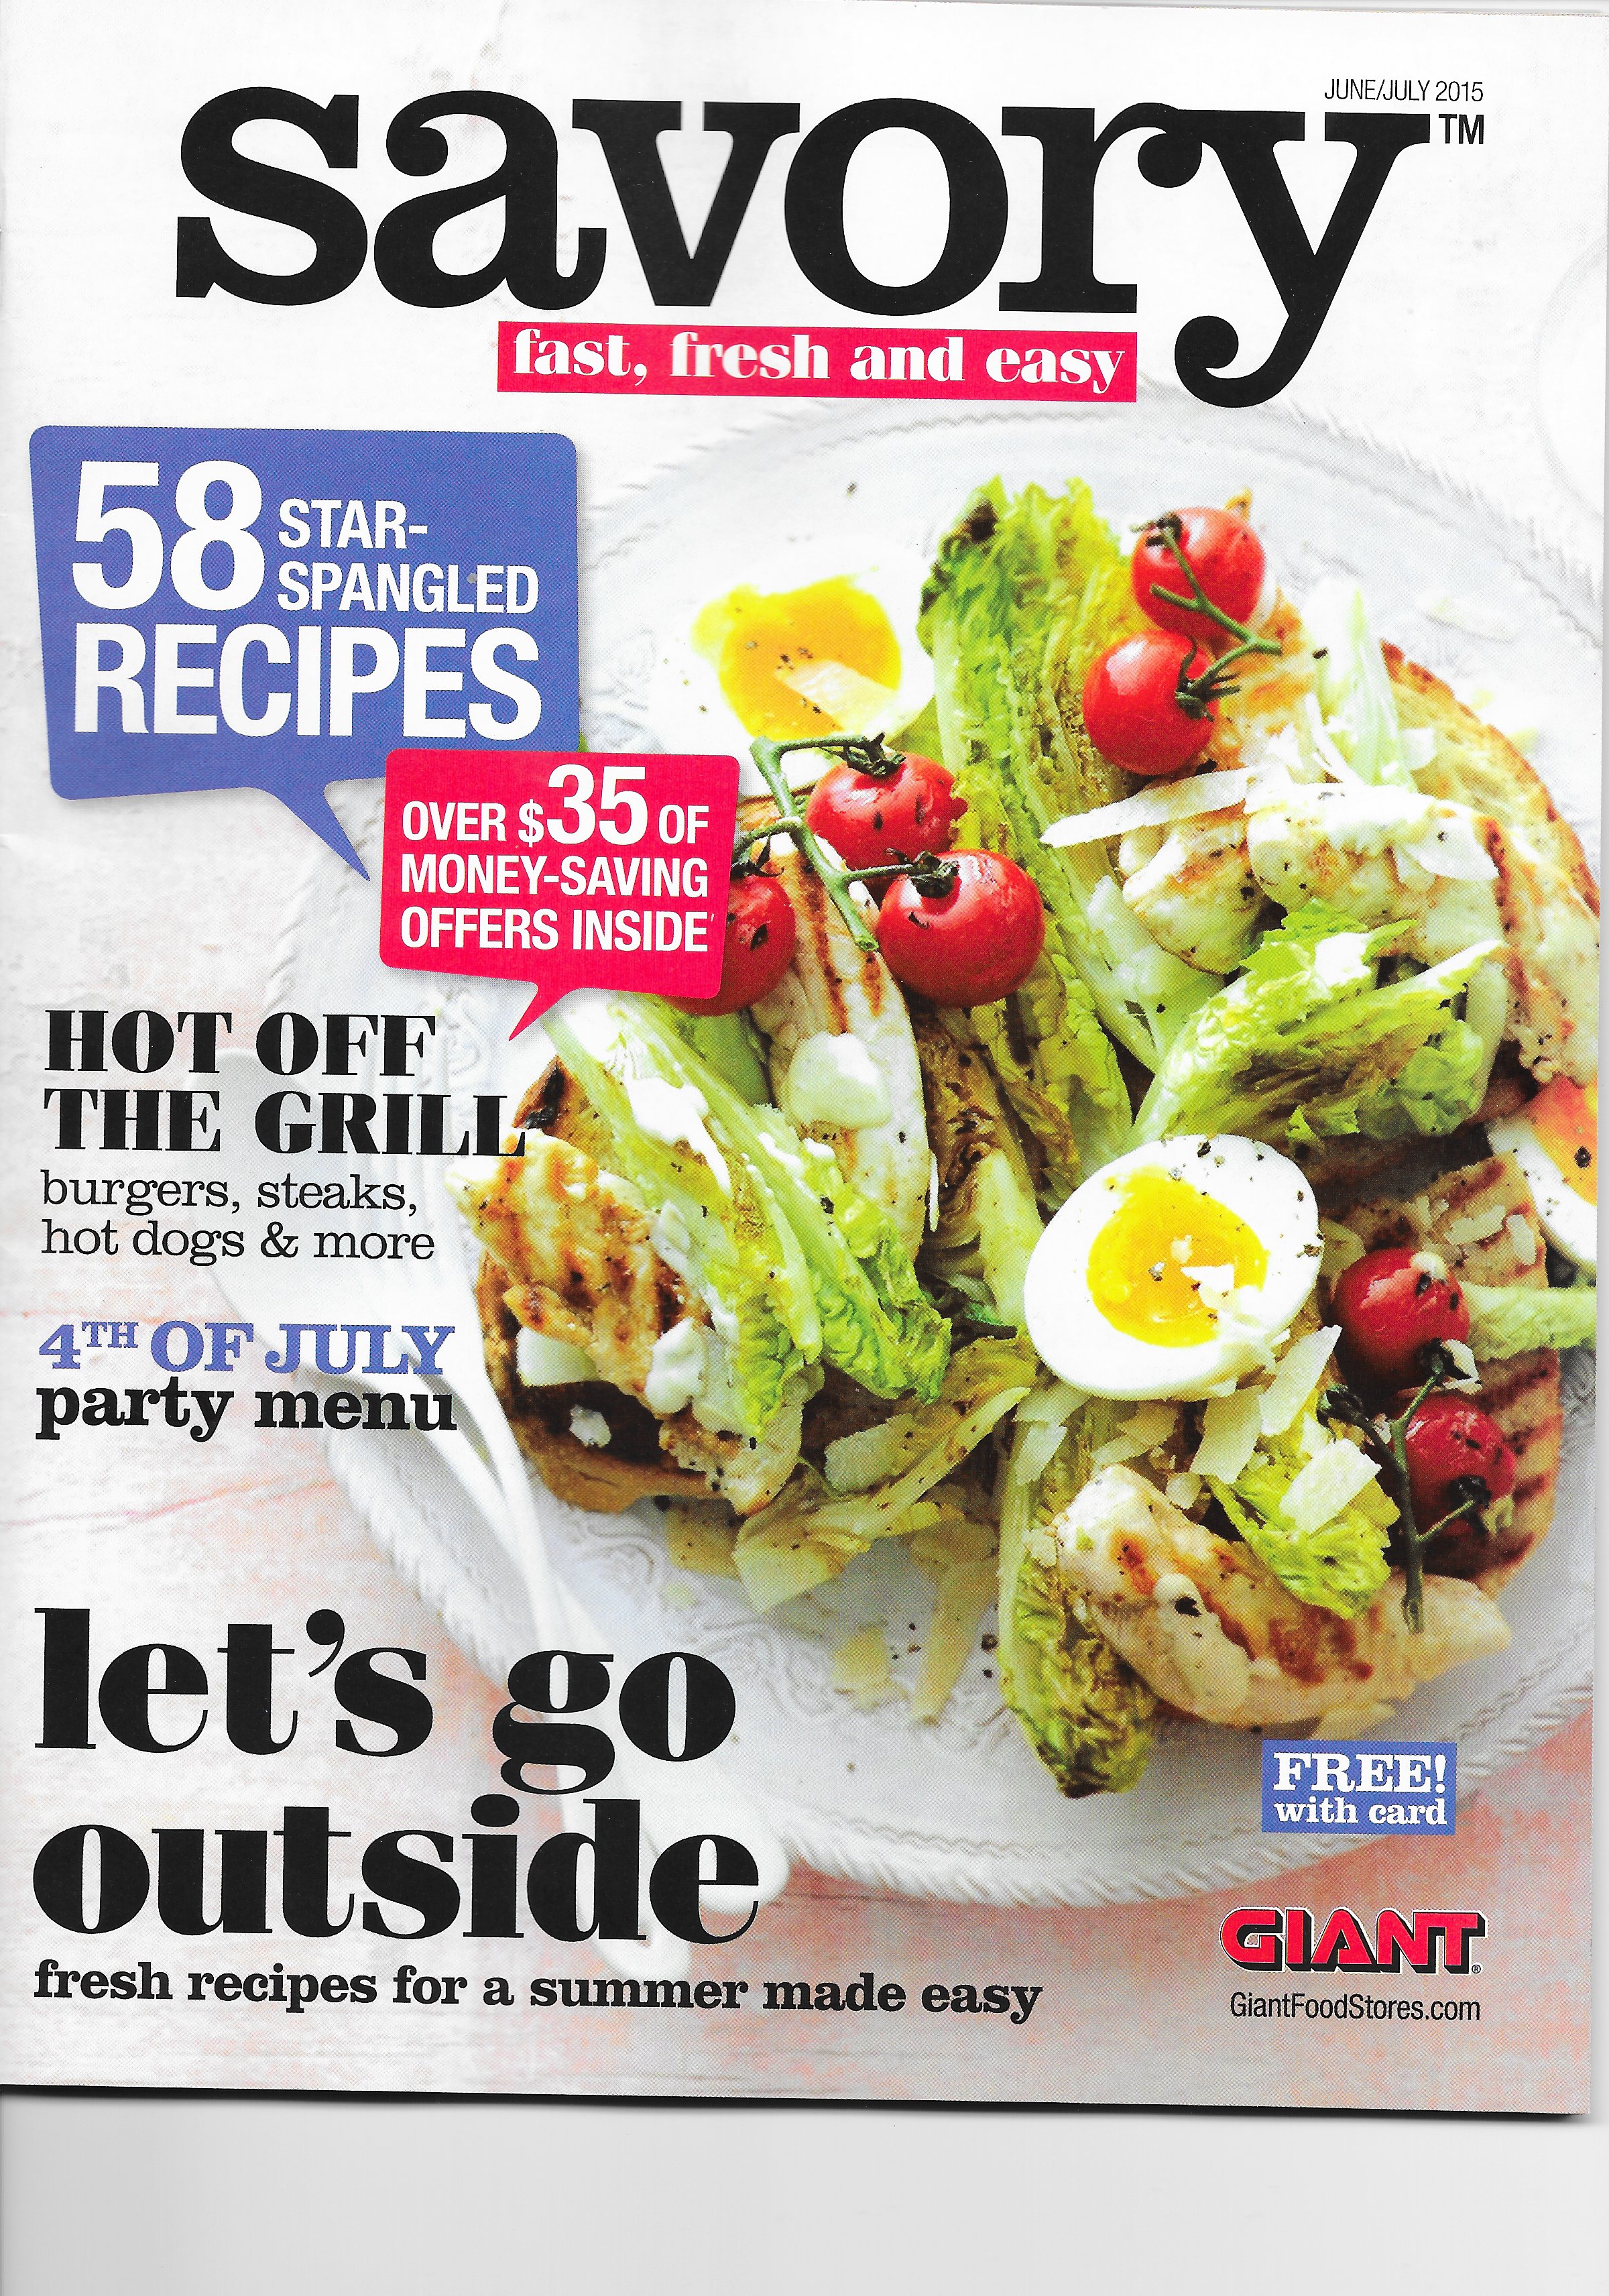 Giant’s new food magazine Savory: Fast, Fresh, and Easy is Available